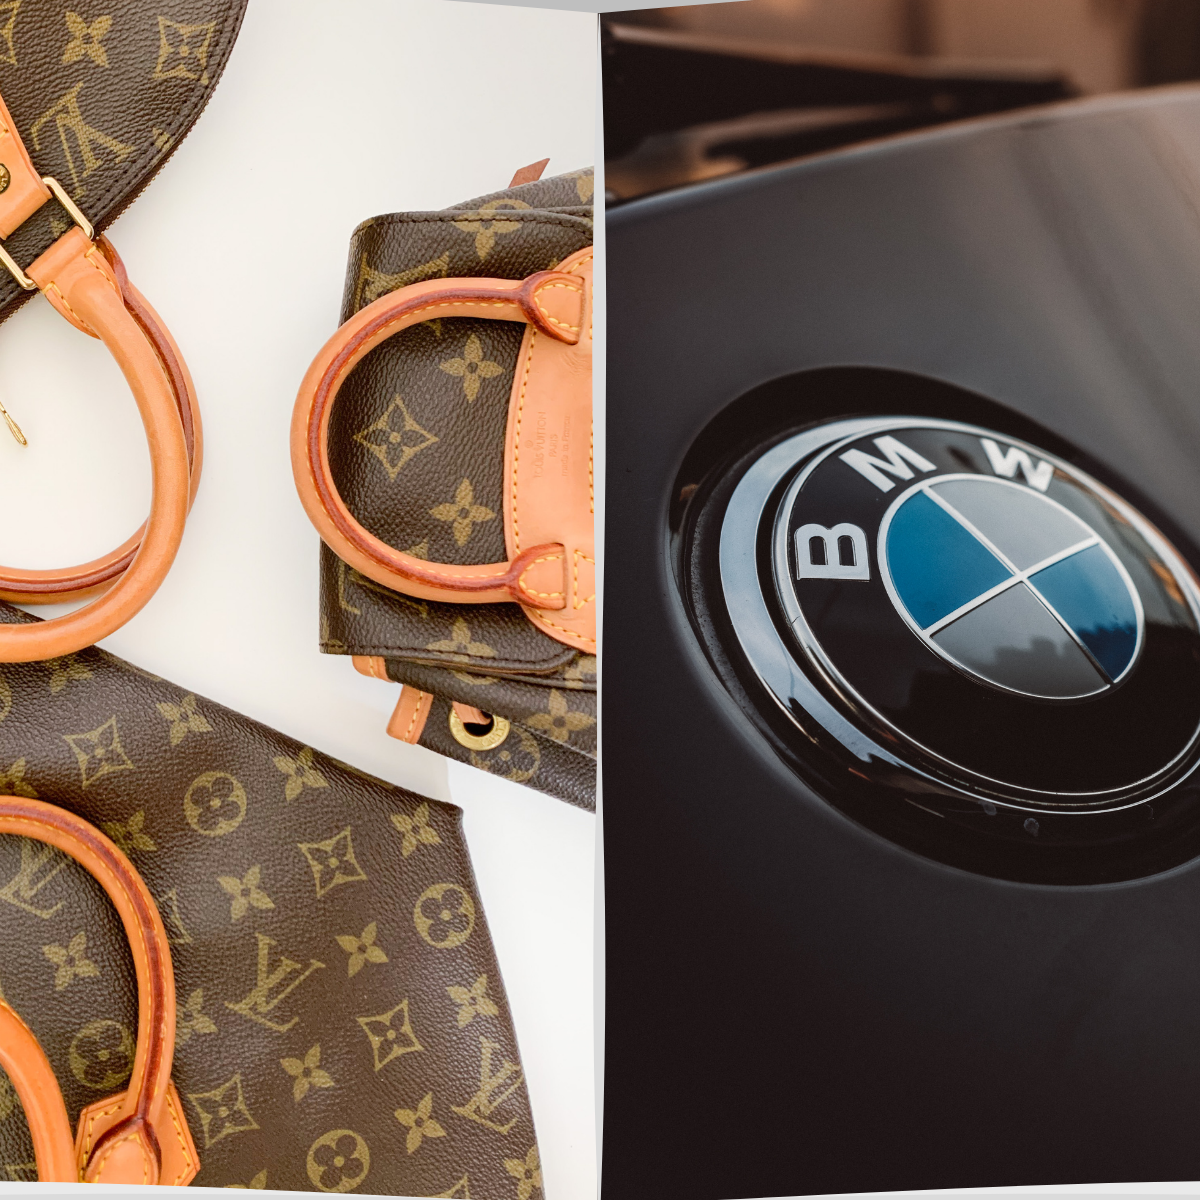 Porter's Diamond Model analysis: Louis Vuitton and BMW, by BRAND MINDS